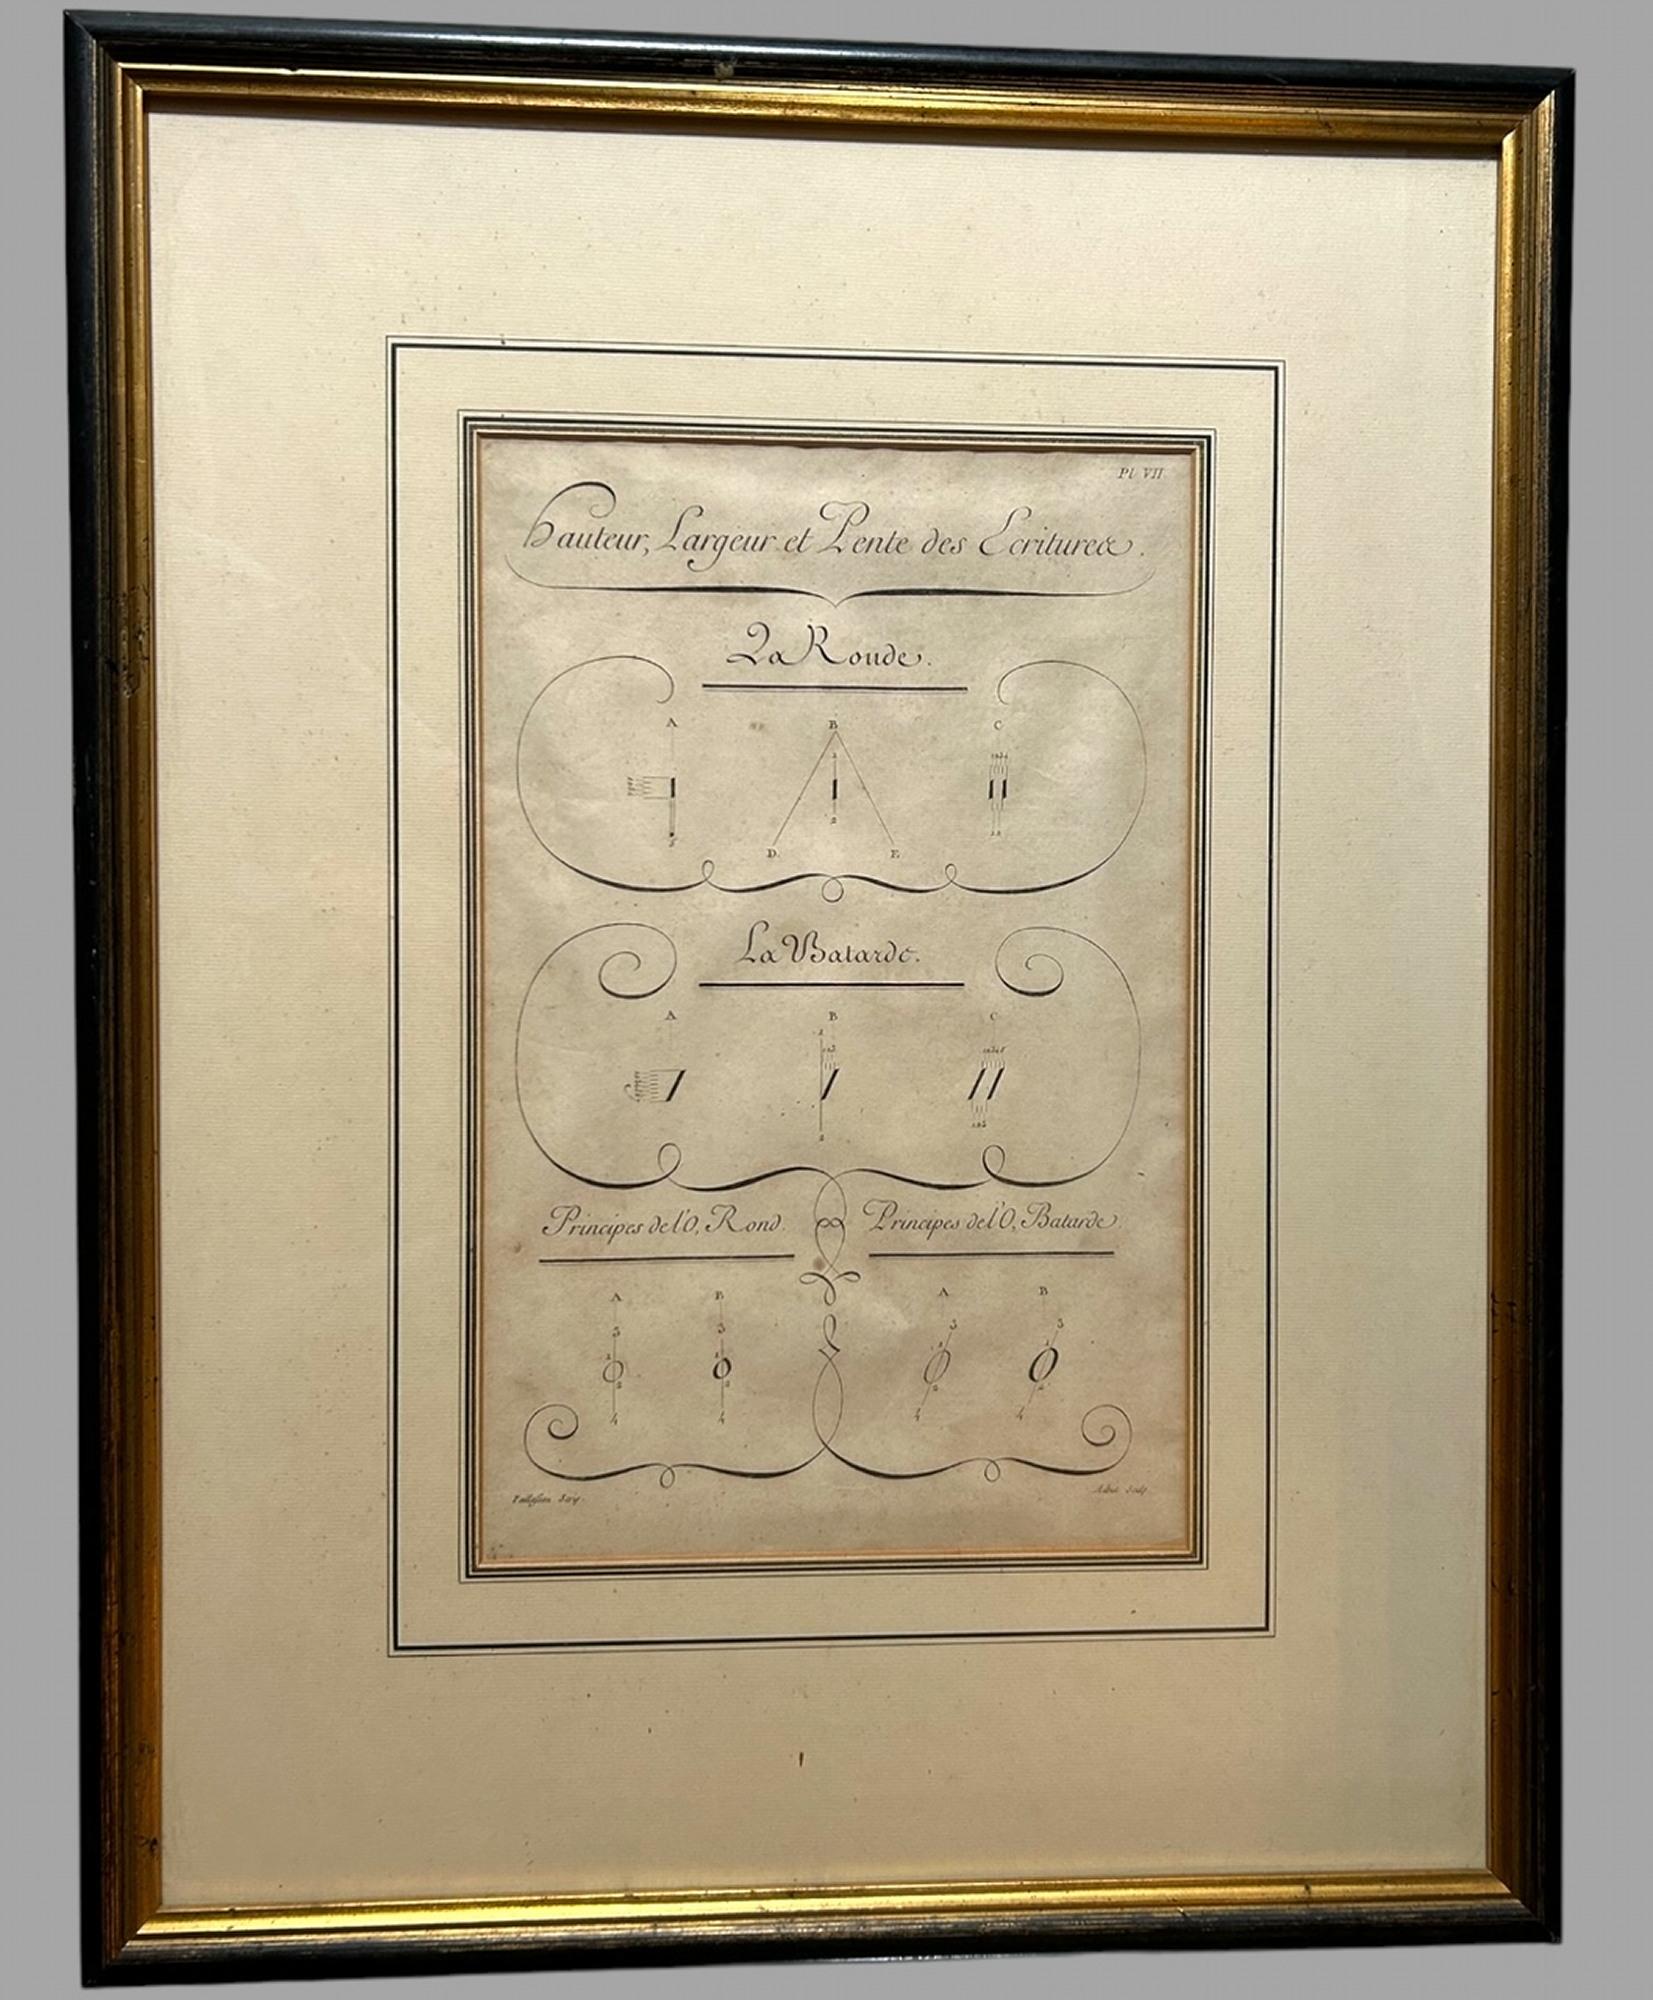 A Wonderful Set Of Eight Plates from Charles Paillasson's L'Art d'Ecrire all individually framed c1763 with Frenchman Aubin engraver.

Charles Paillasson's celebrated handwriting manual *L'Art d'Ecrire* was originally published in 1763 as part of